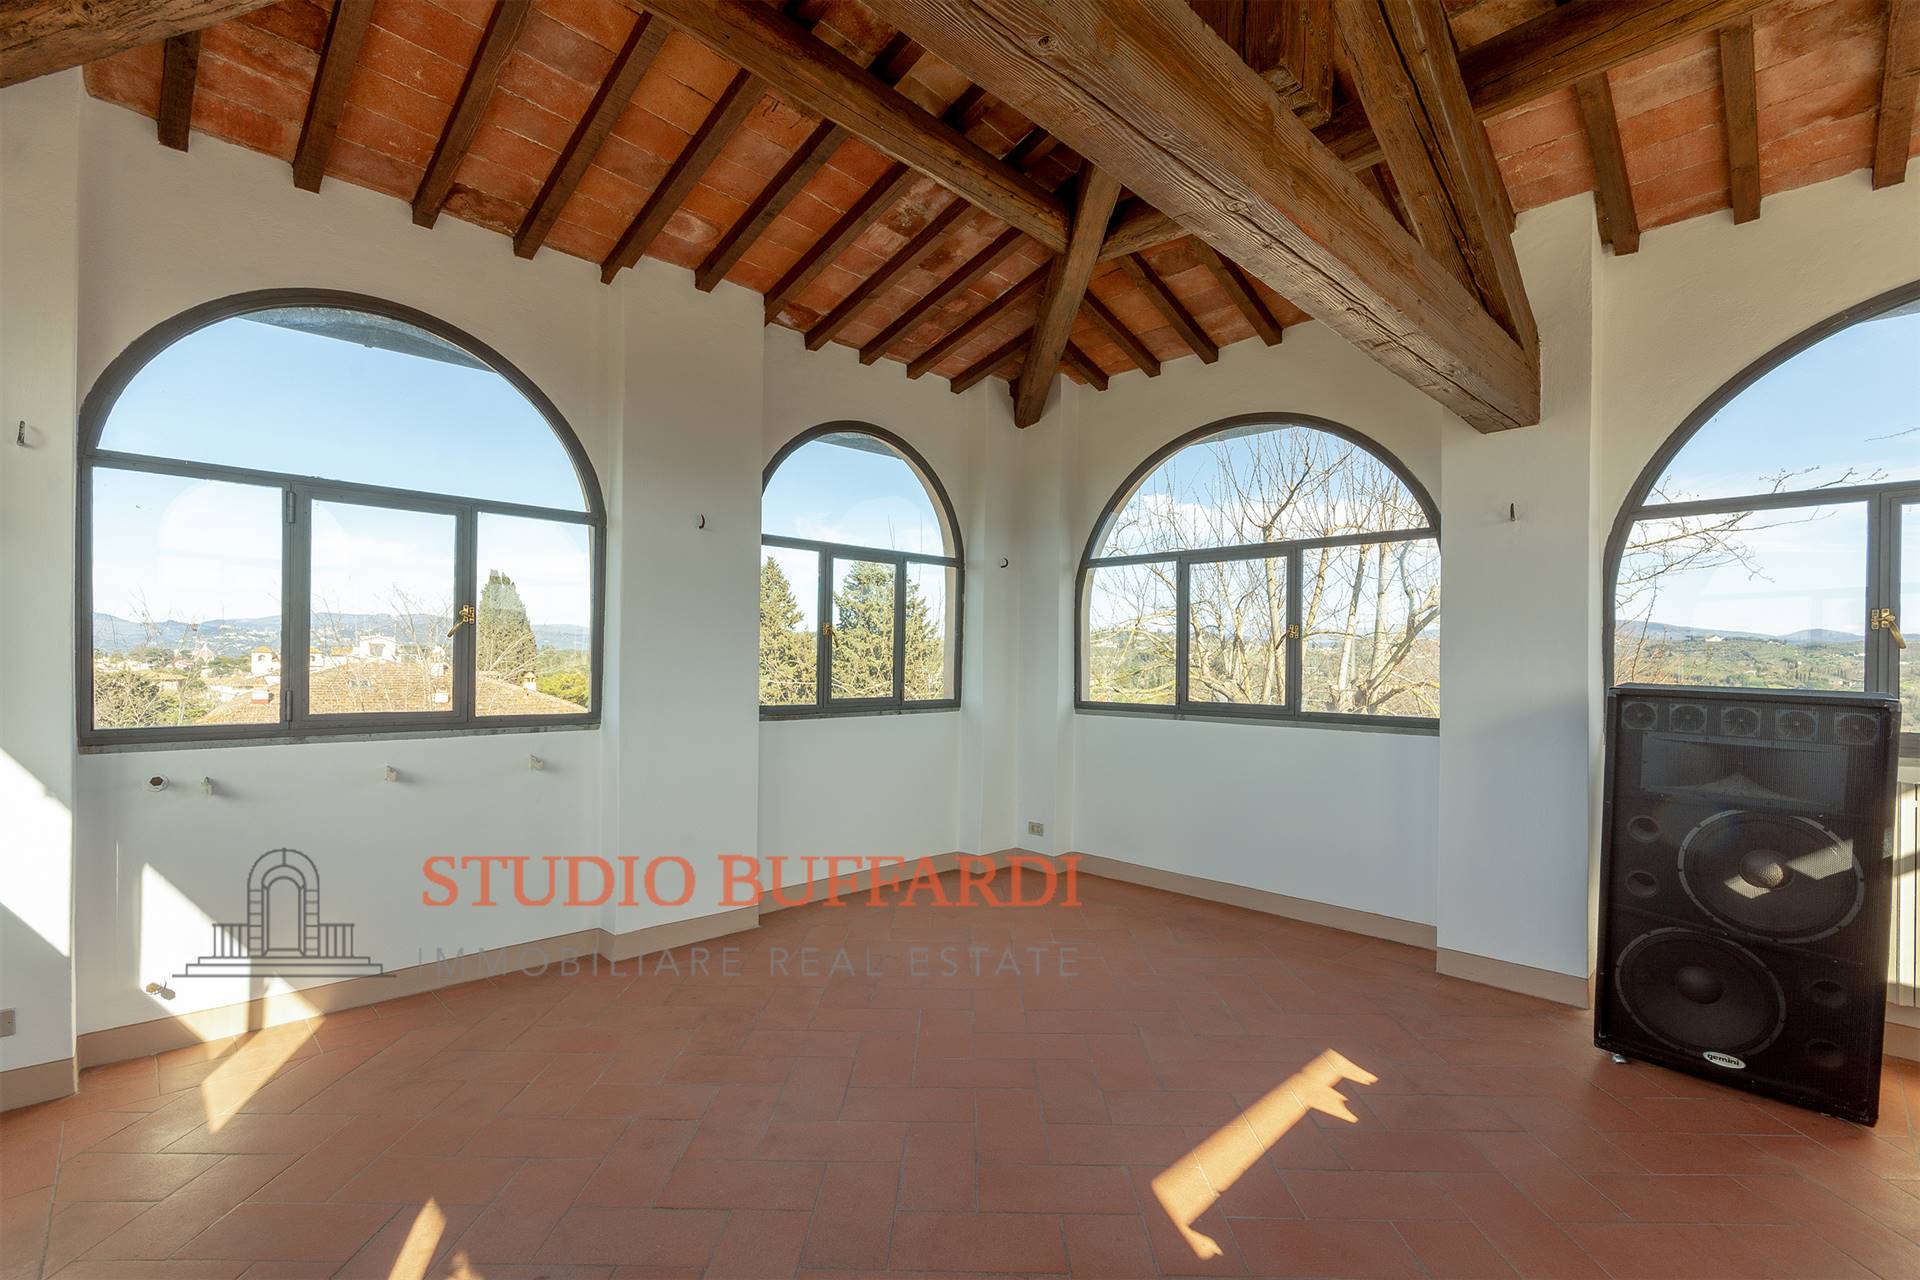 GALLUZZO, FIRENZE, Apartment for sale of 280 Sq. mt., Good condition, Heating Individual heating system, Energetic class: G, placed at 1° on 2, 